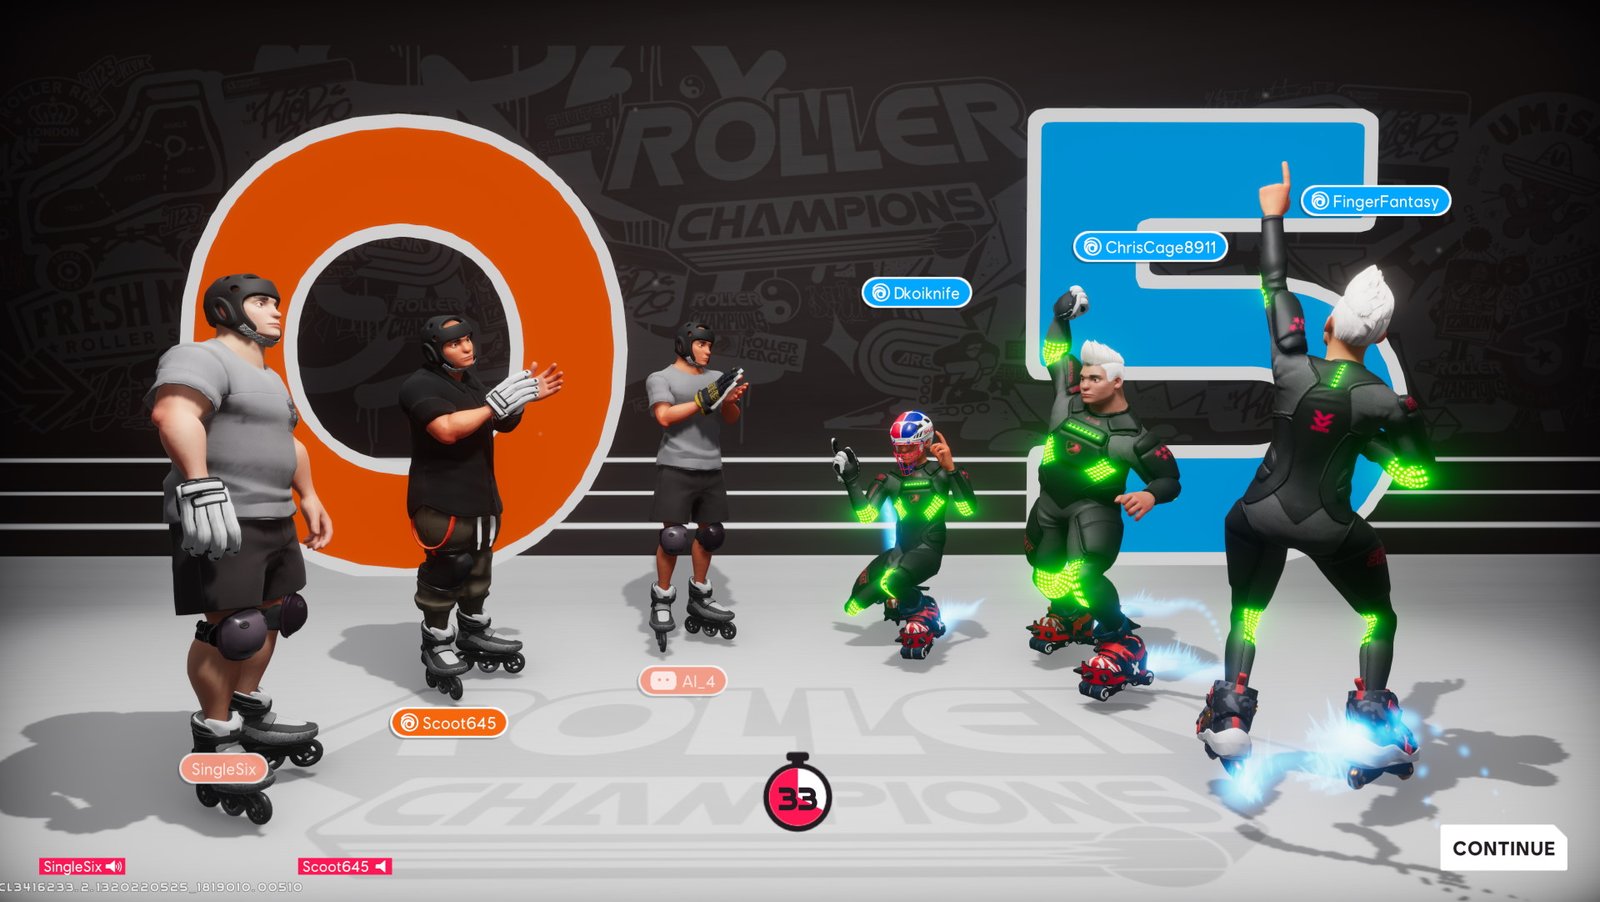 Roller Champions post-game screen